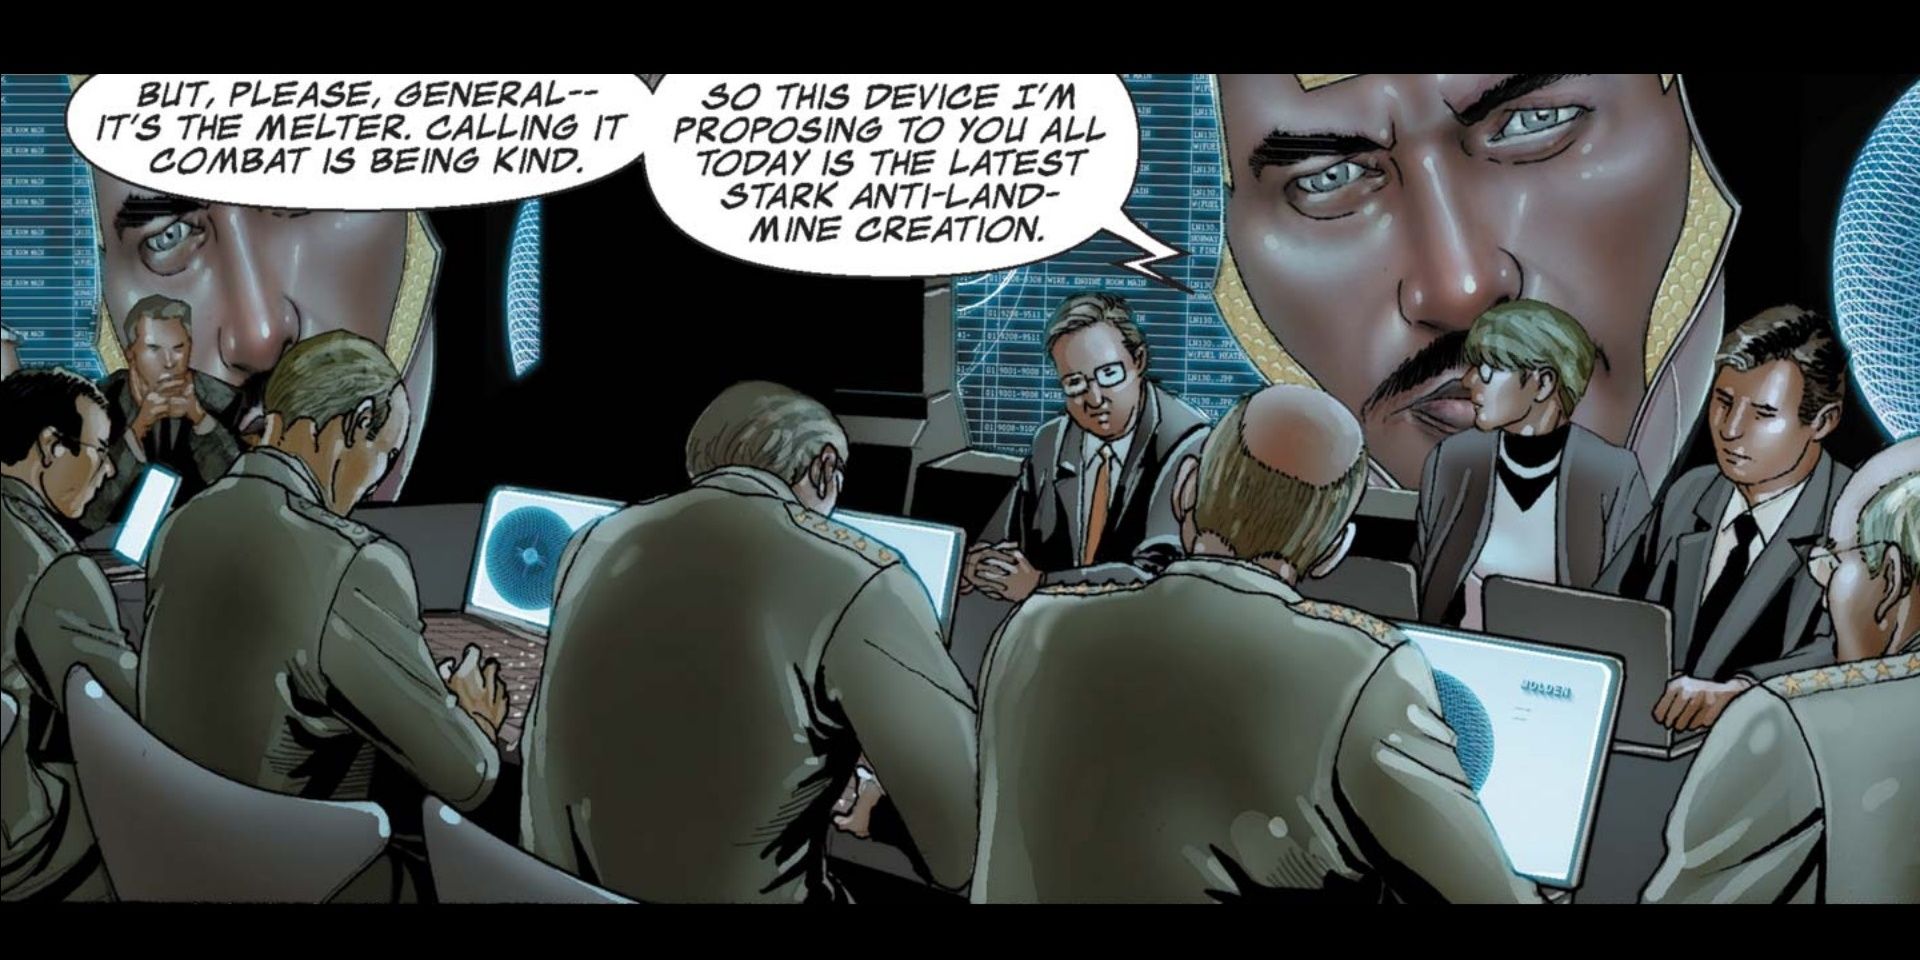 Iron Man talks to general while fighting the Melter